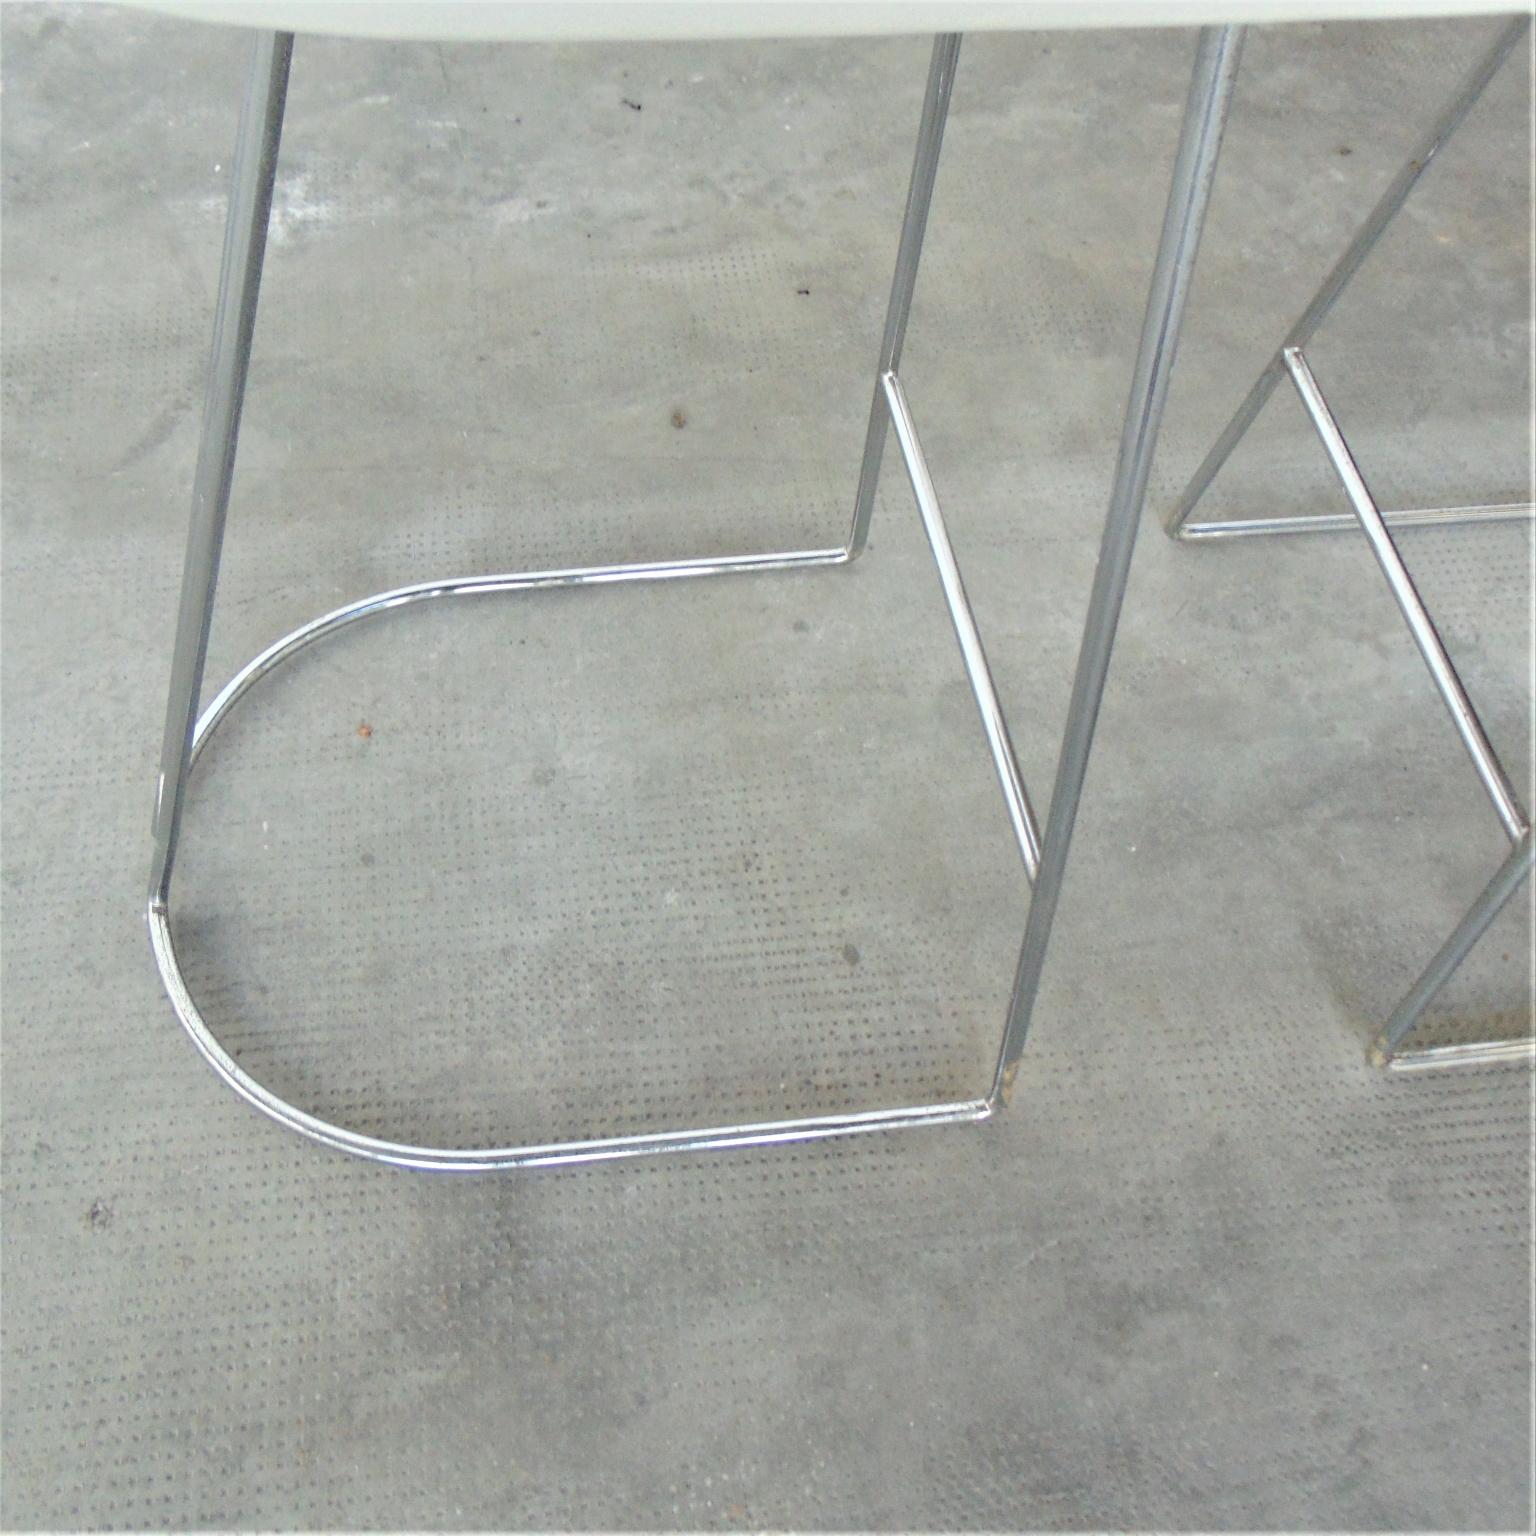 1983 Barstools Set White Leather and Chromed Steel by Sormani, Italy For Sale 1